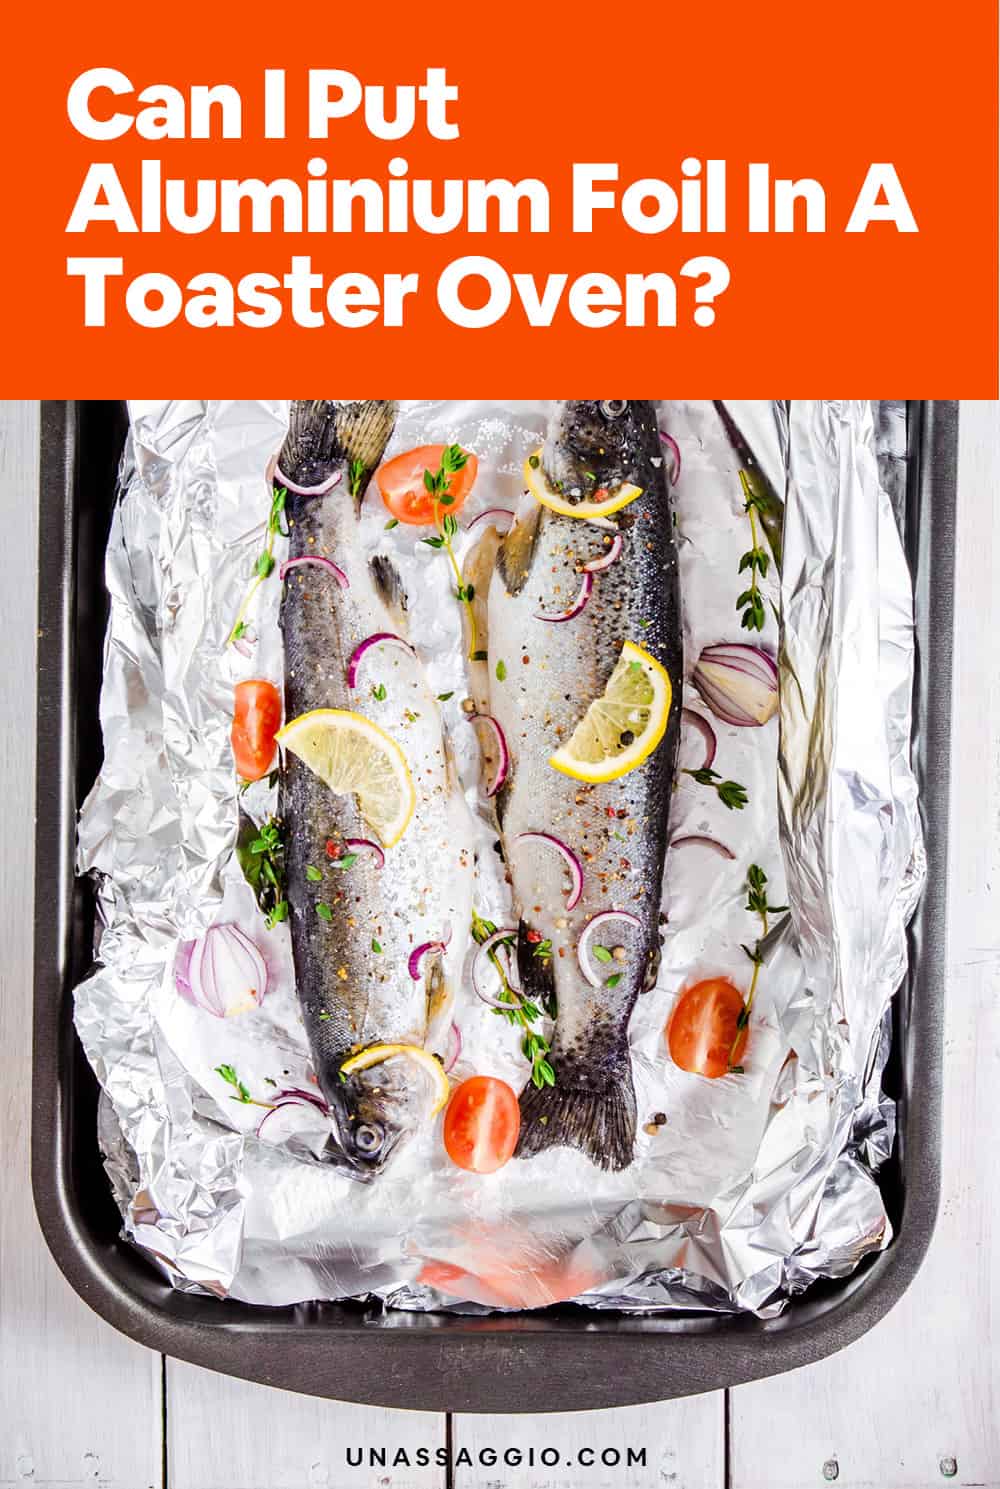 Can I Put Aluminium Foil In A Toaster Oven?